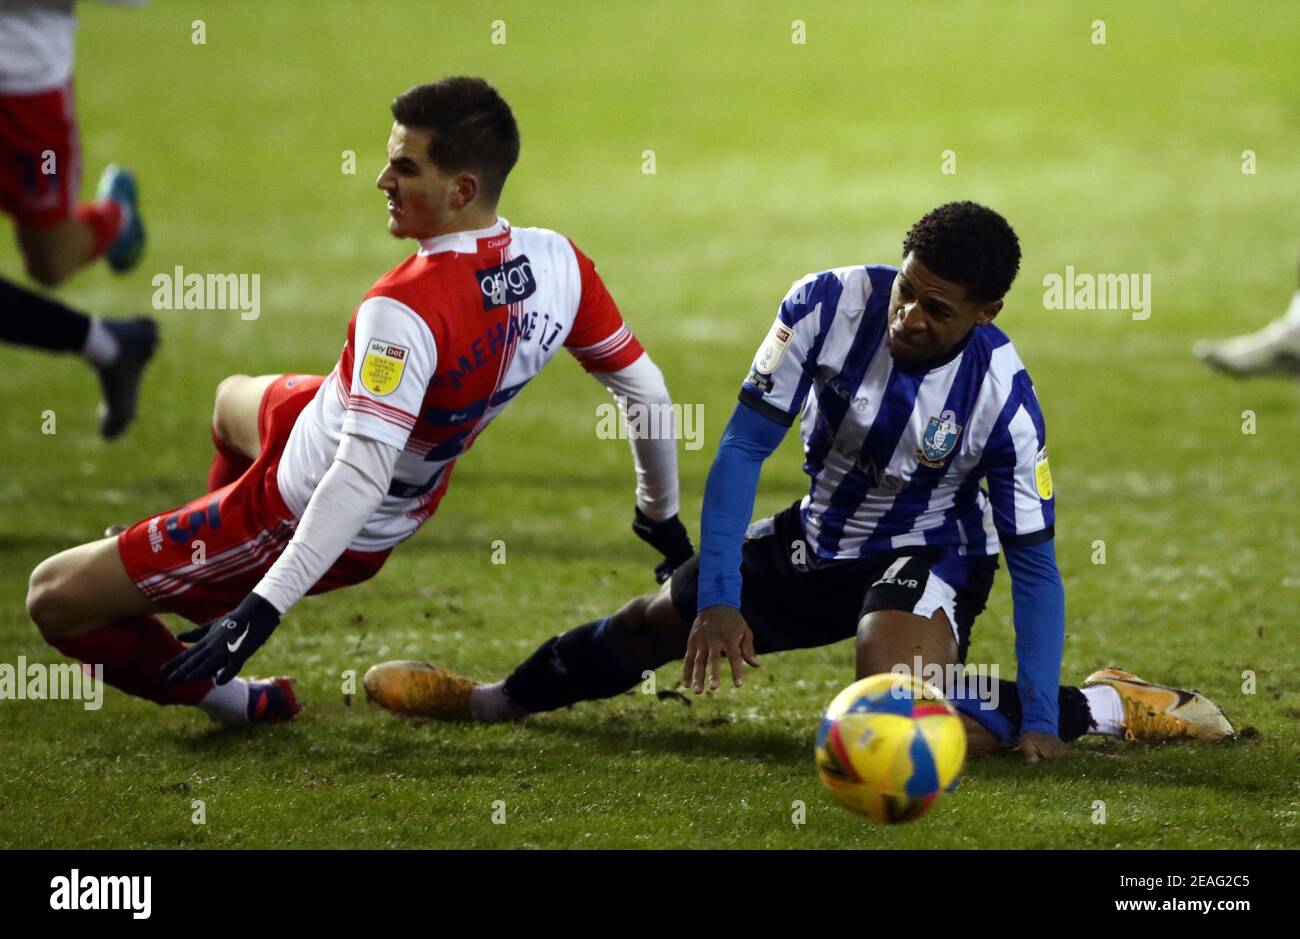 Wycombe Wanderers' Anis Mehmeti goes down in the penalty area after a challenge from Sheffield Wednesday's Kadeem Harris during the Sky Bet Championship match at Hillsborough, Sheffield. Picture date: Tuesday February 9, 2021. Stock Photo